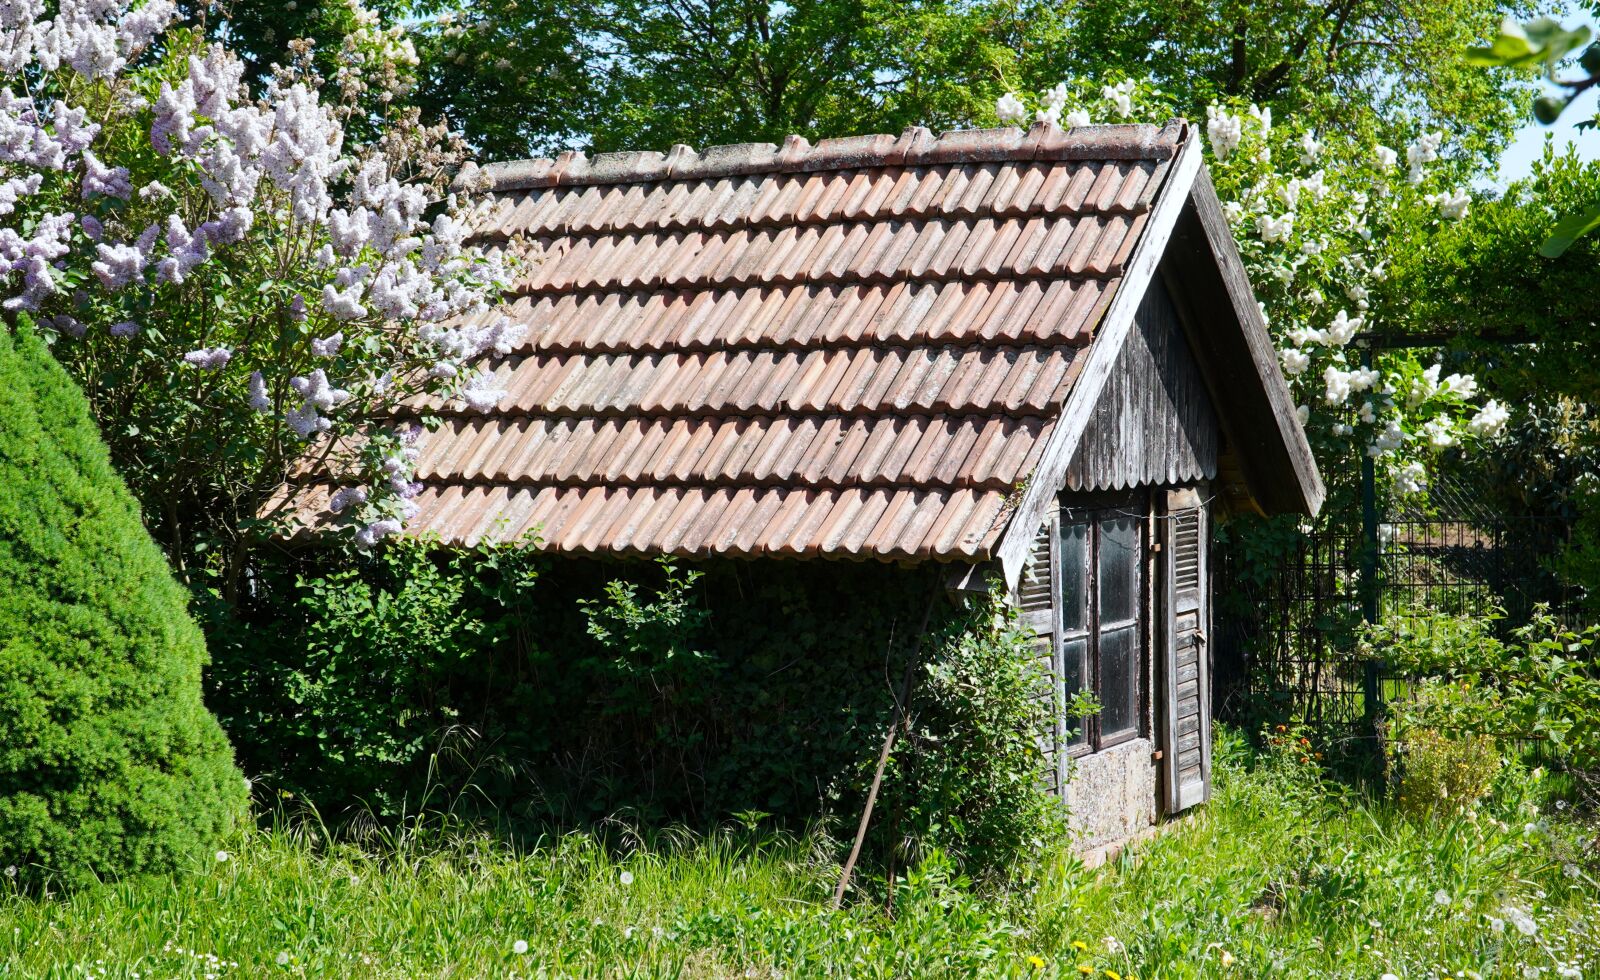 Sony a6400 sample photo. Garden shed, old, garden photography